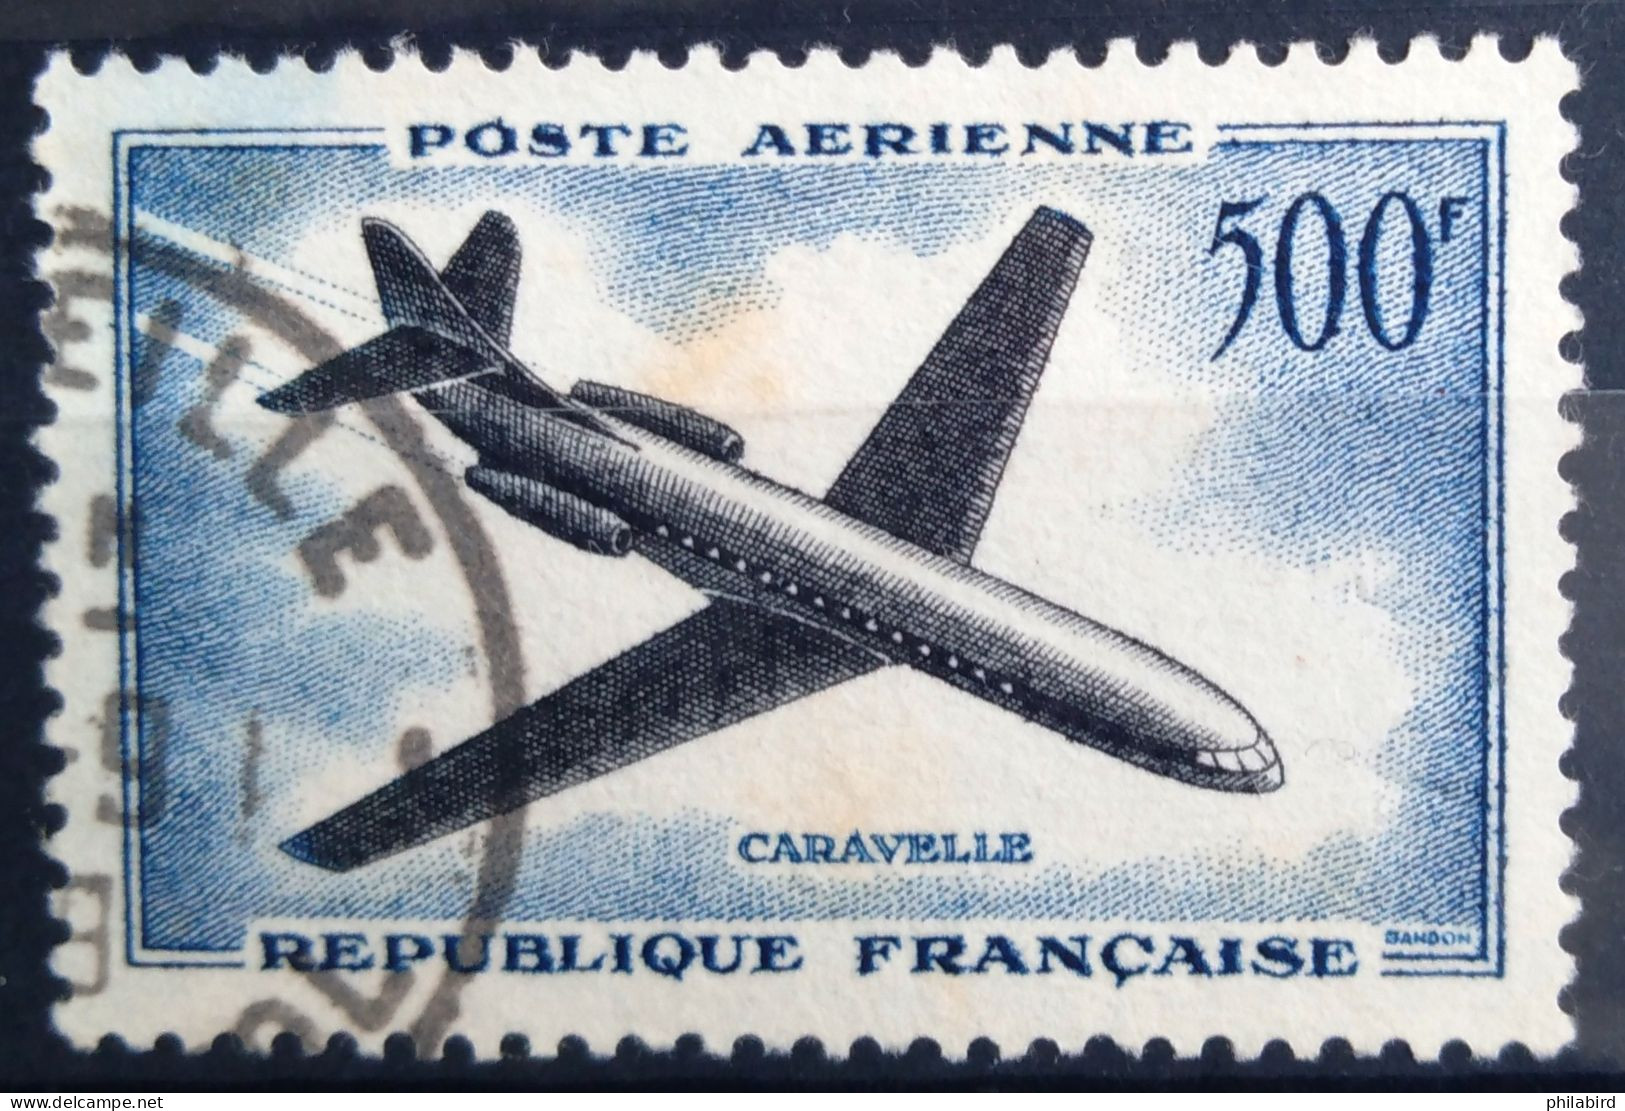 FRANCE                P.A  N° 36                          OBLITERE - 1927-1959 Used